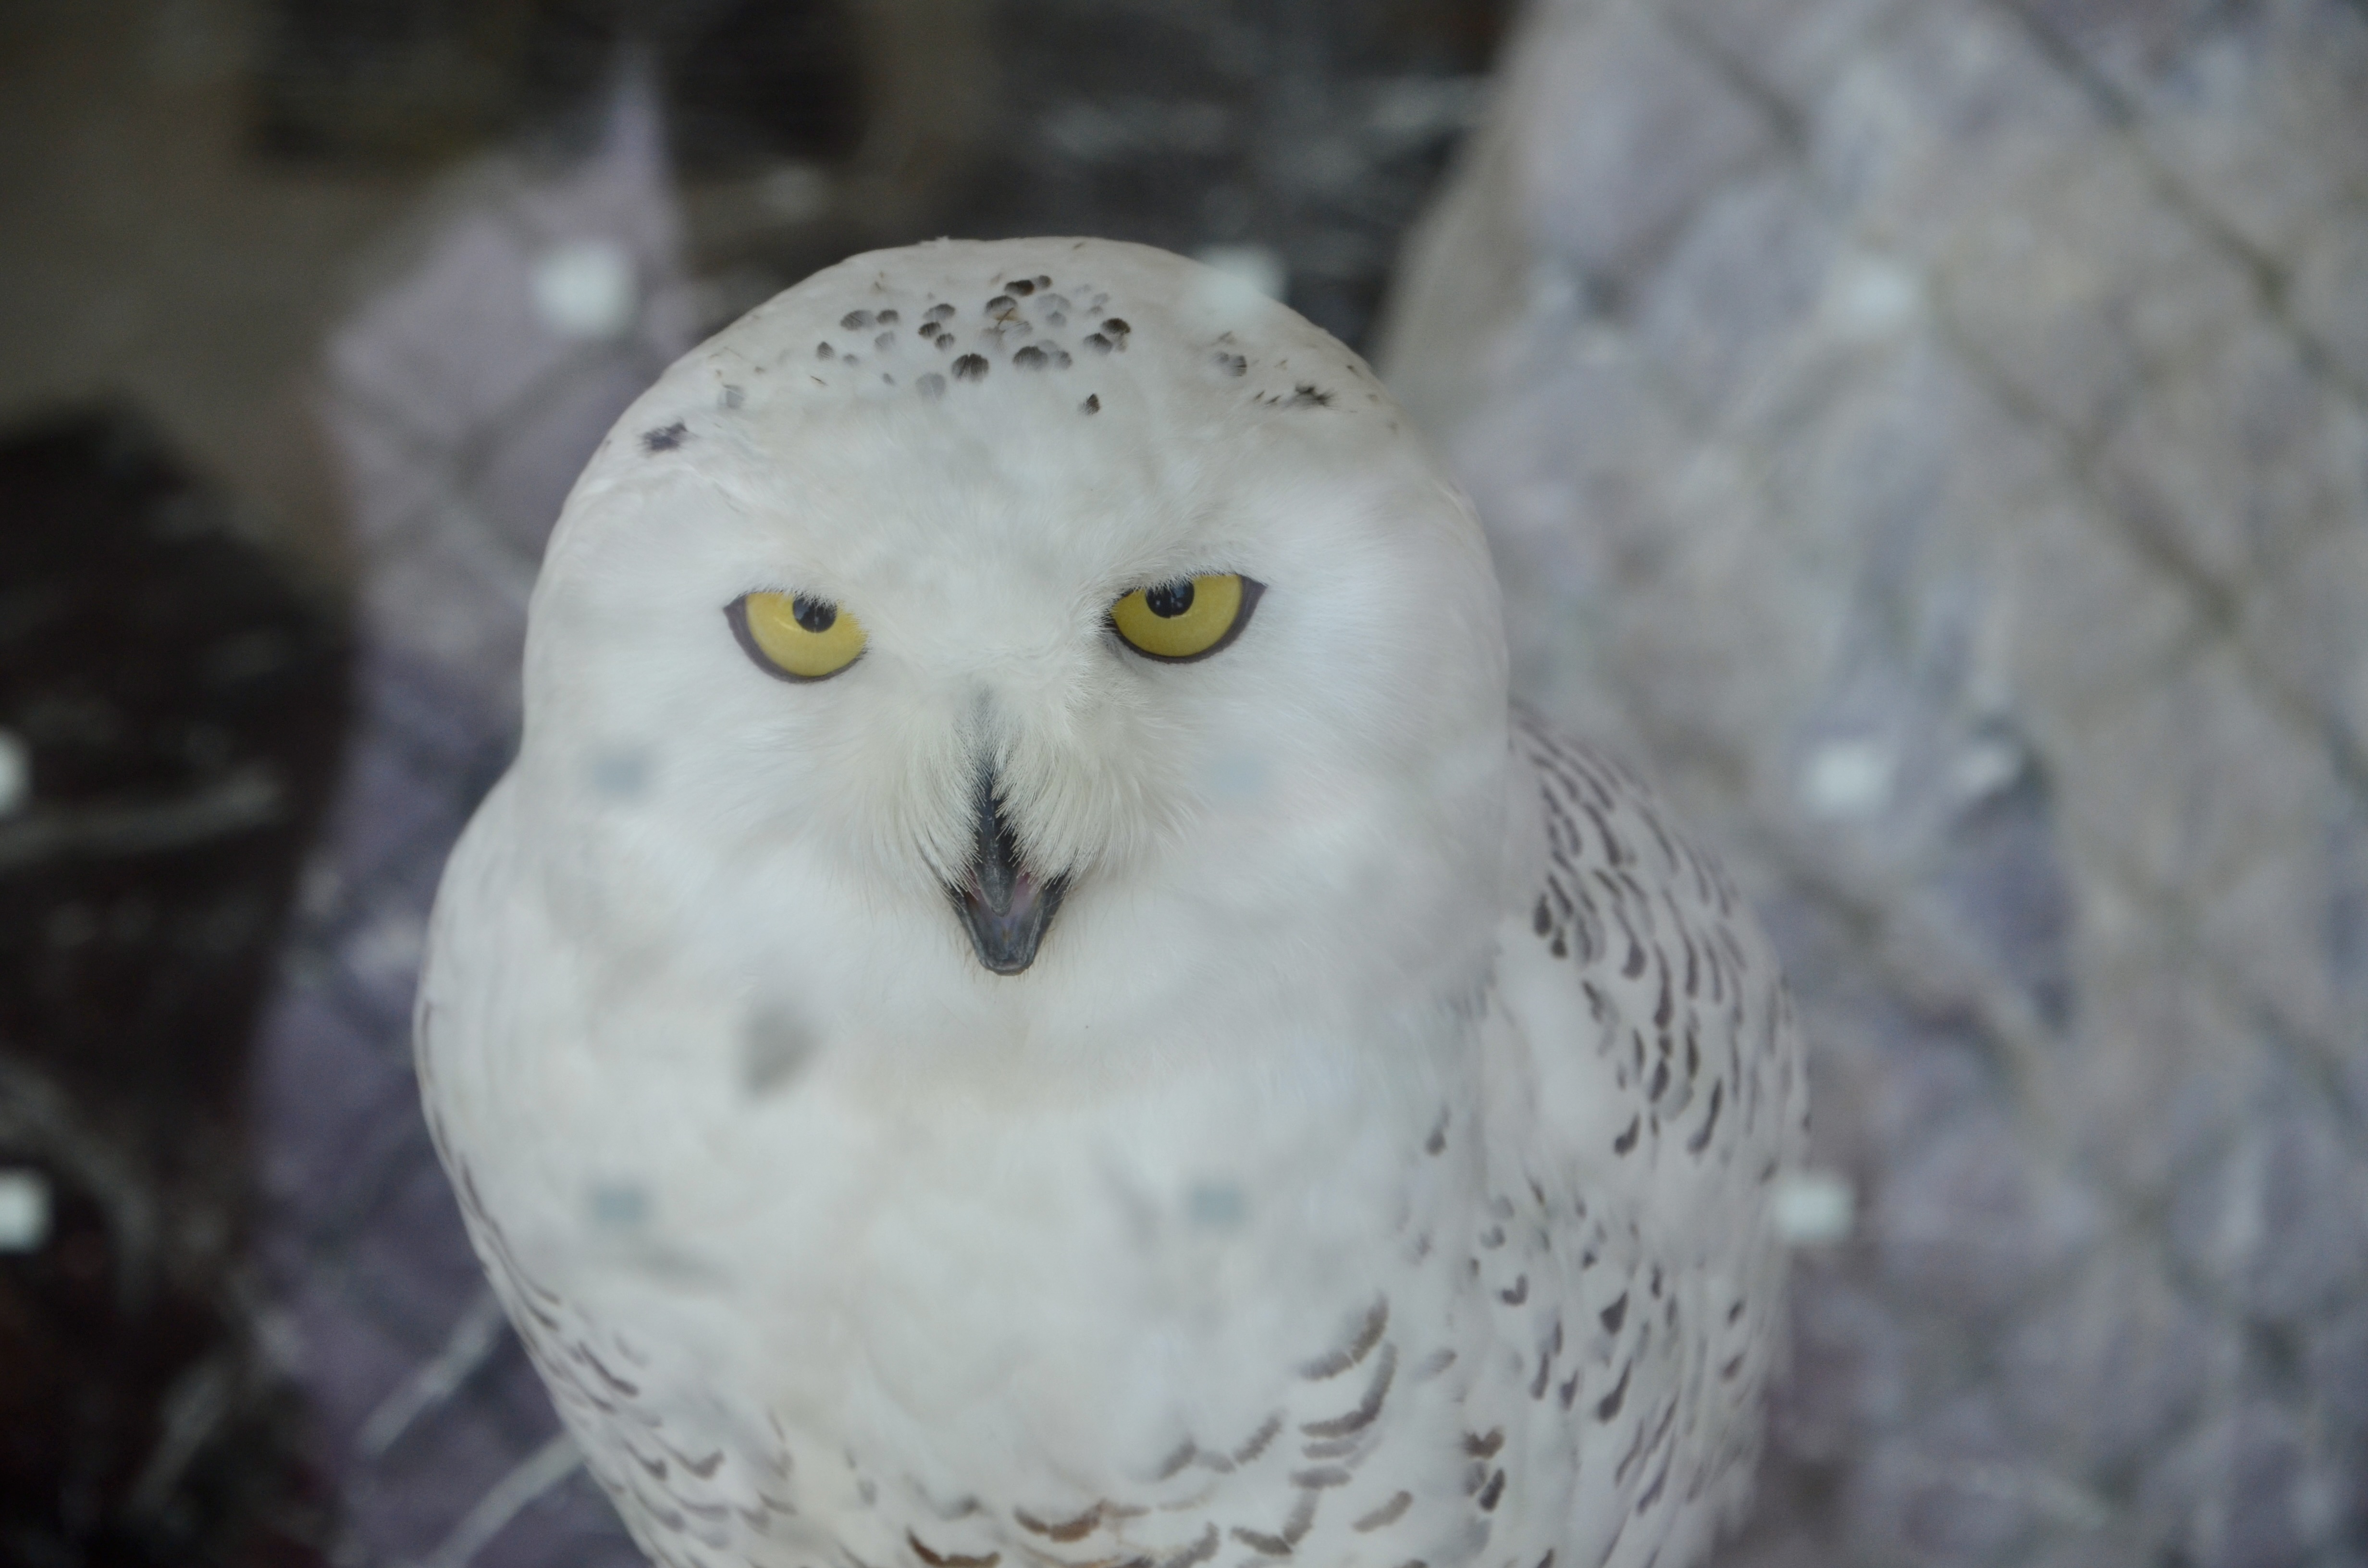 Outdoor Discovery Center Snowy Owl Exhibit